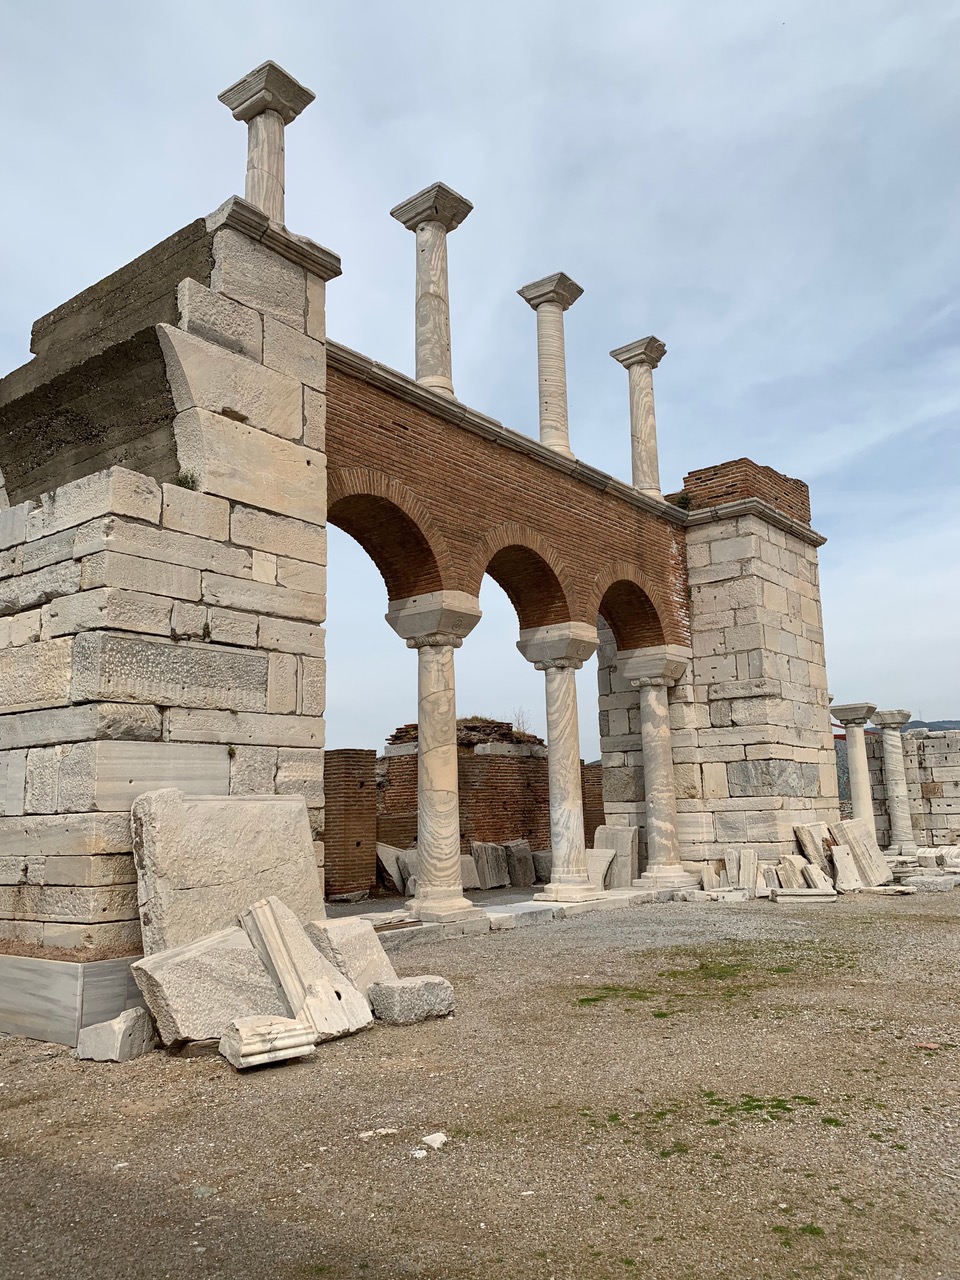 Three rounded arched columns with four more atop